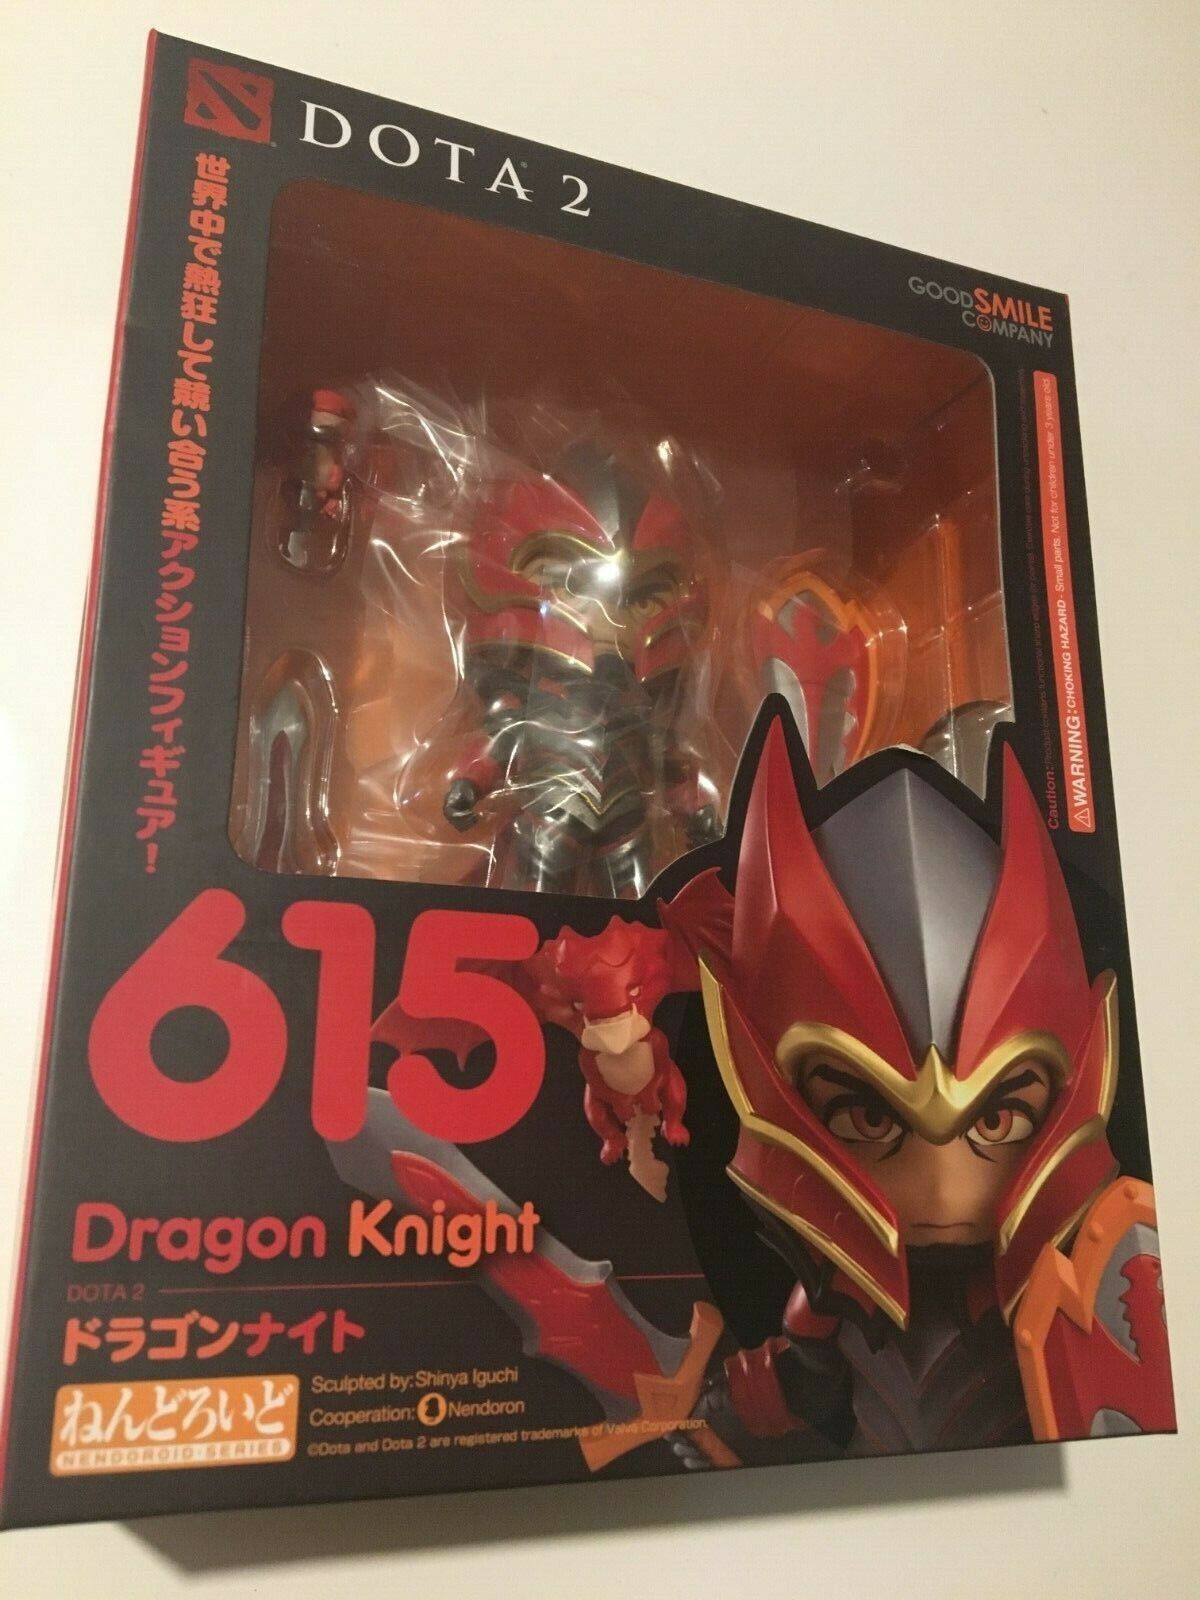  Dota 2\'s Dragon Knight: Authentic Nendoroid from Good Smile Company Japan